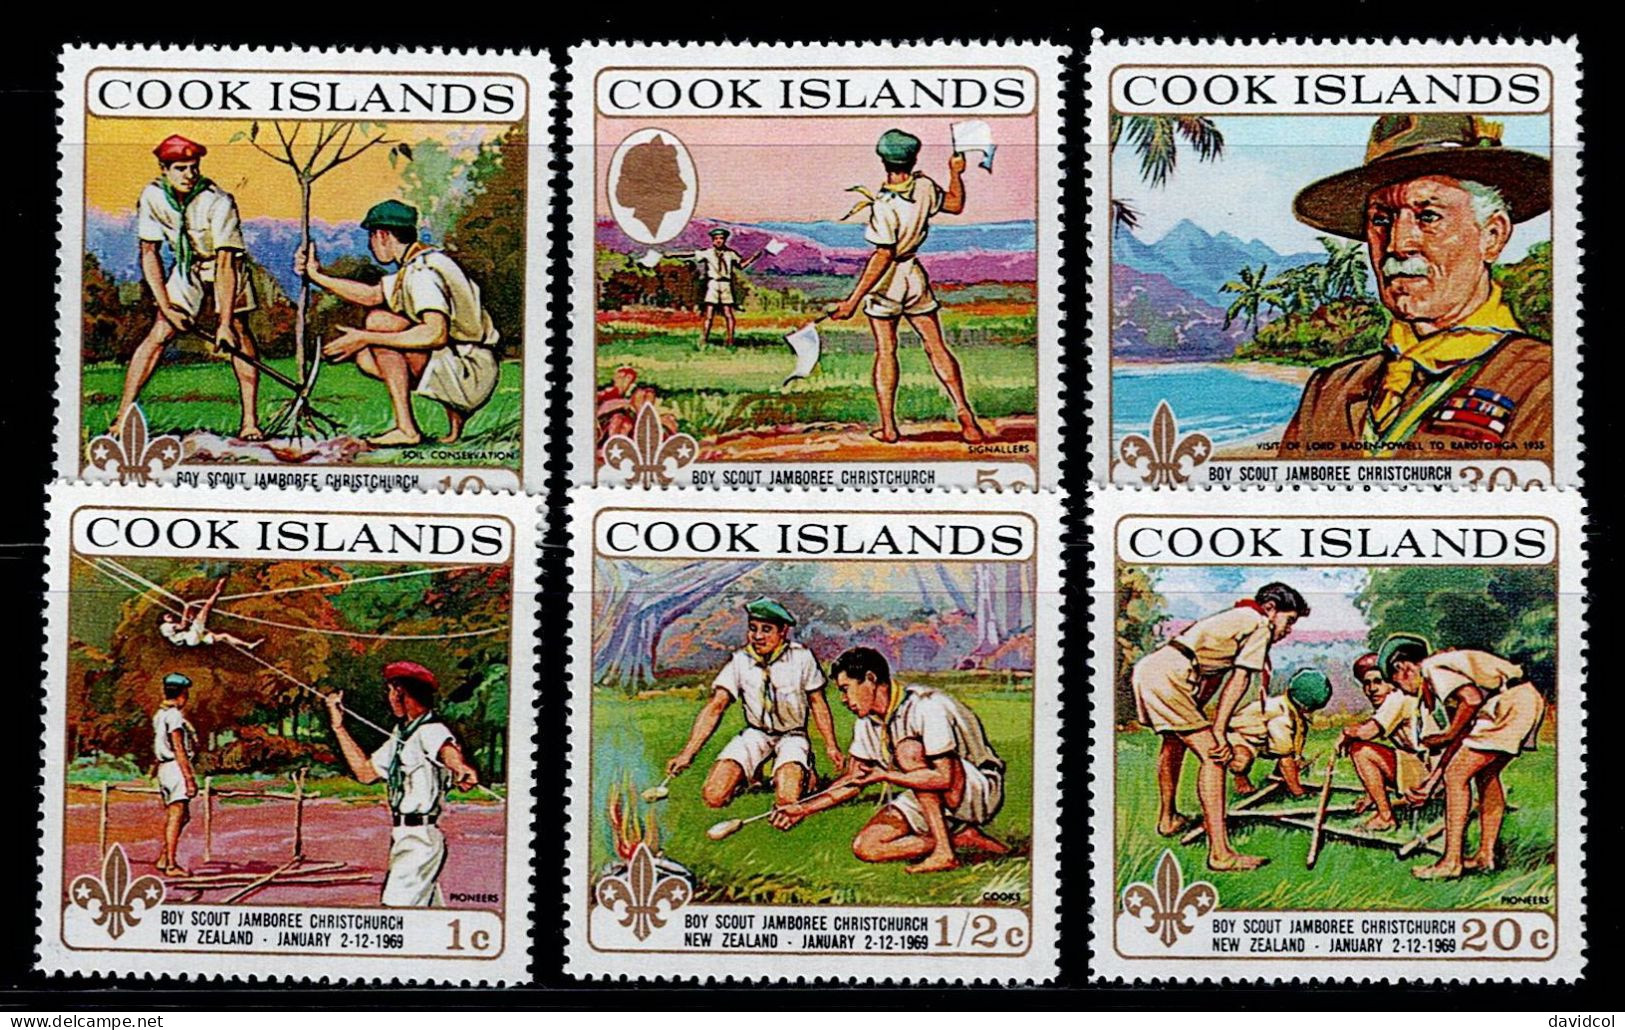 COO-01- COOK ISLANDS - 1969 - MNH -SCOUTS- SCOUT JAMBOREE NEW ZEALAND - Cookeilanden